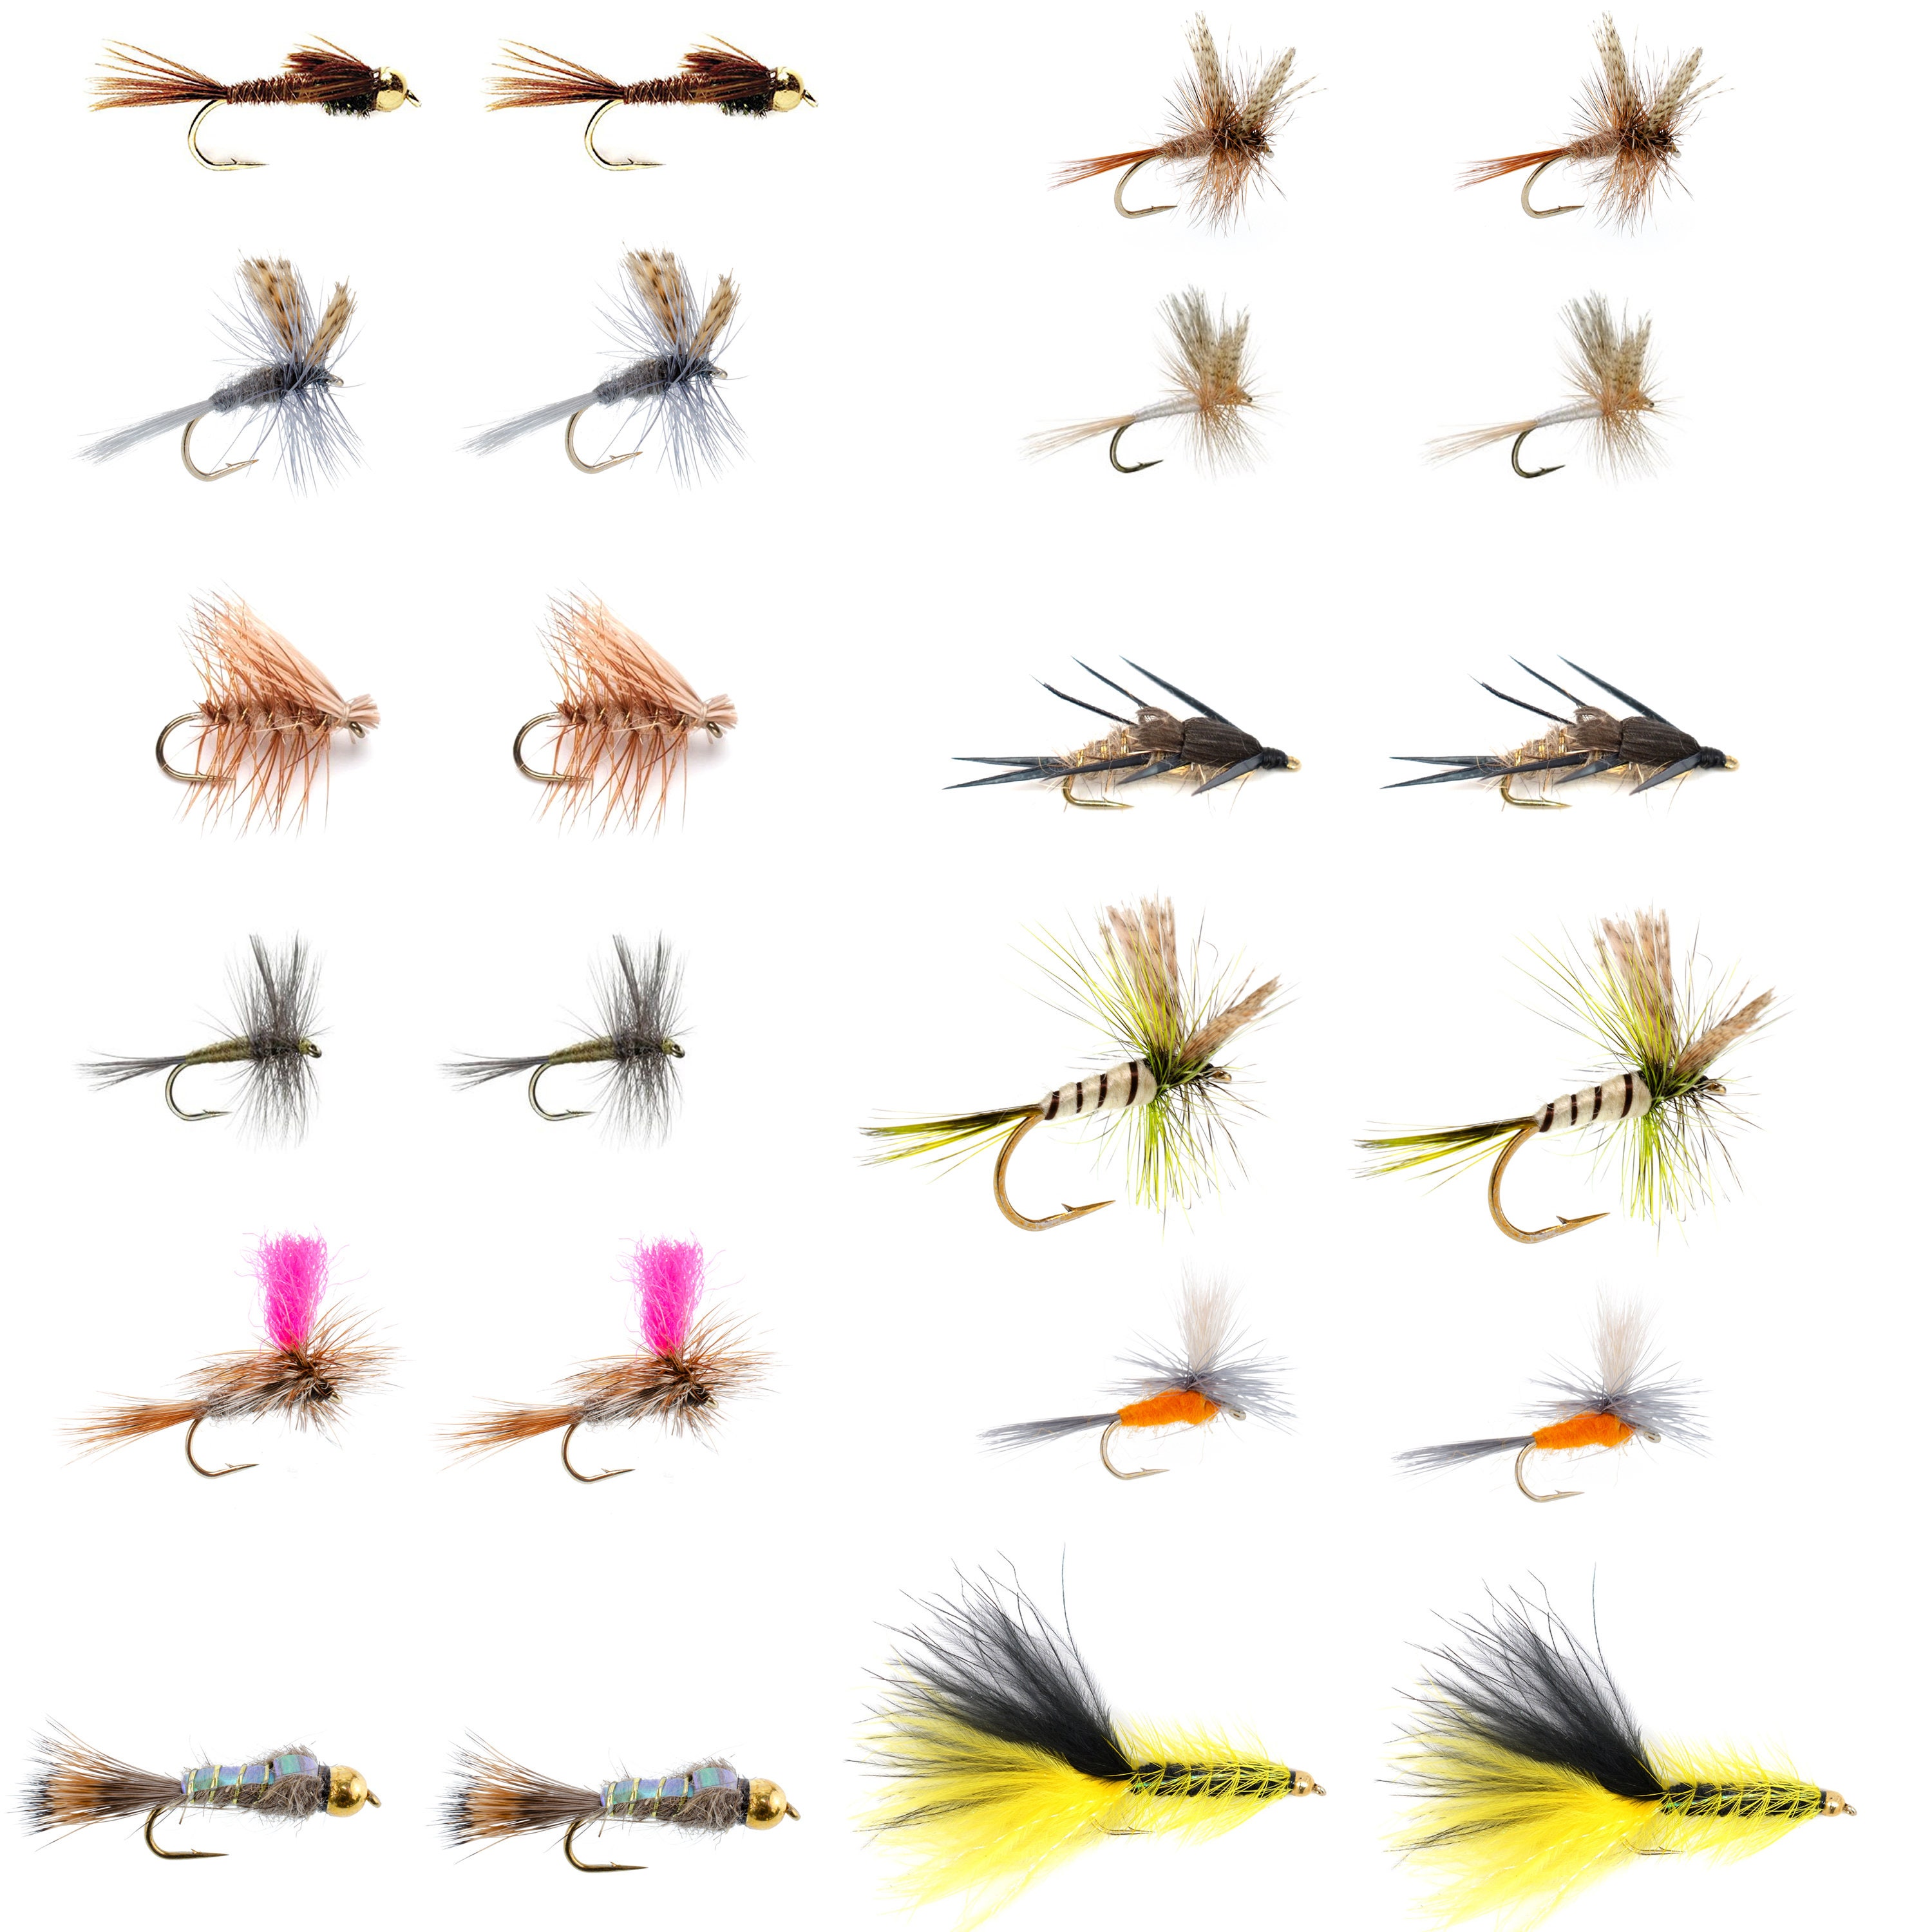 Eastern Trout Fly Assortment 24 Essential Dry and Nymph Fly Fishing Flies  Collection 2 Dozen Trout Flies With Fly Box 